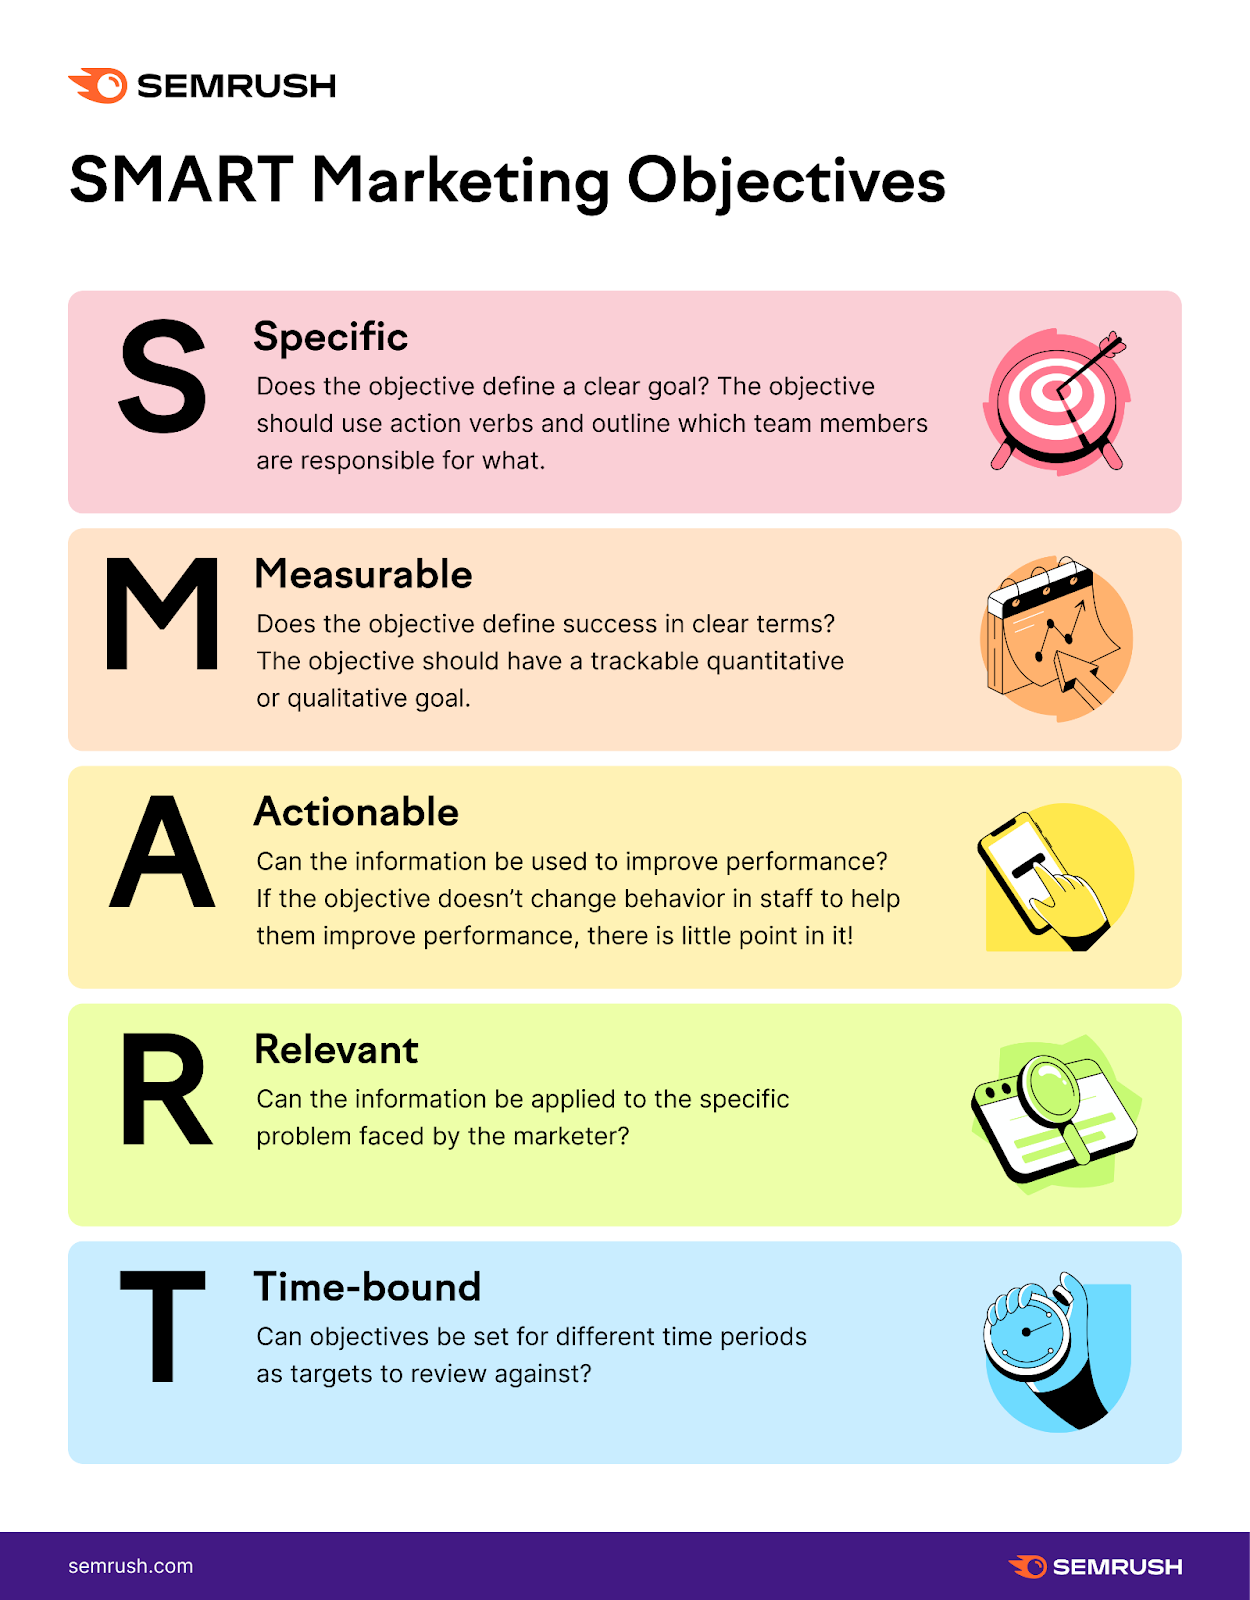 SMART Marketing Objectives infographic